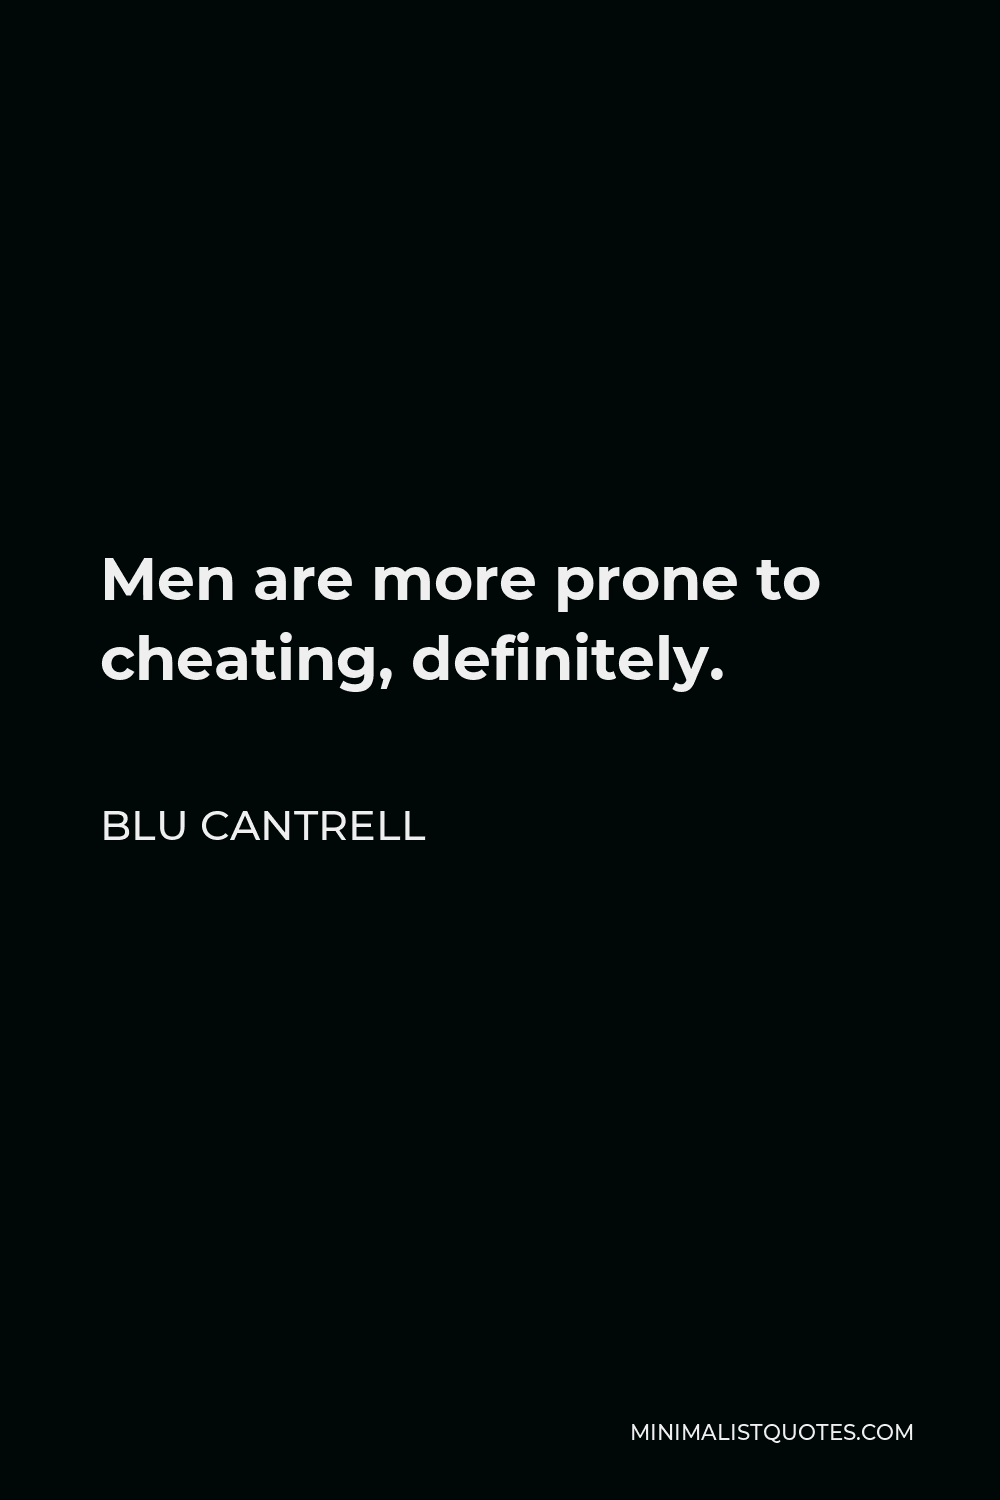 Blu Cantrell Quote - Men are more prone to cheating, definitely.